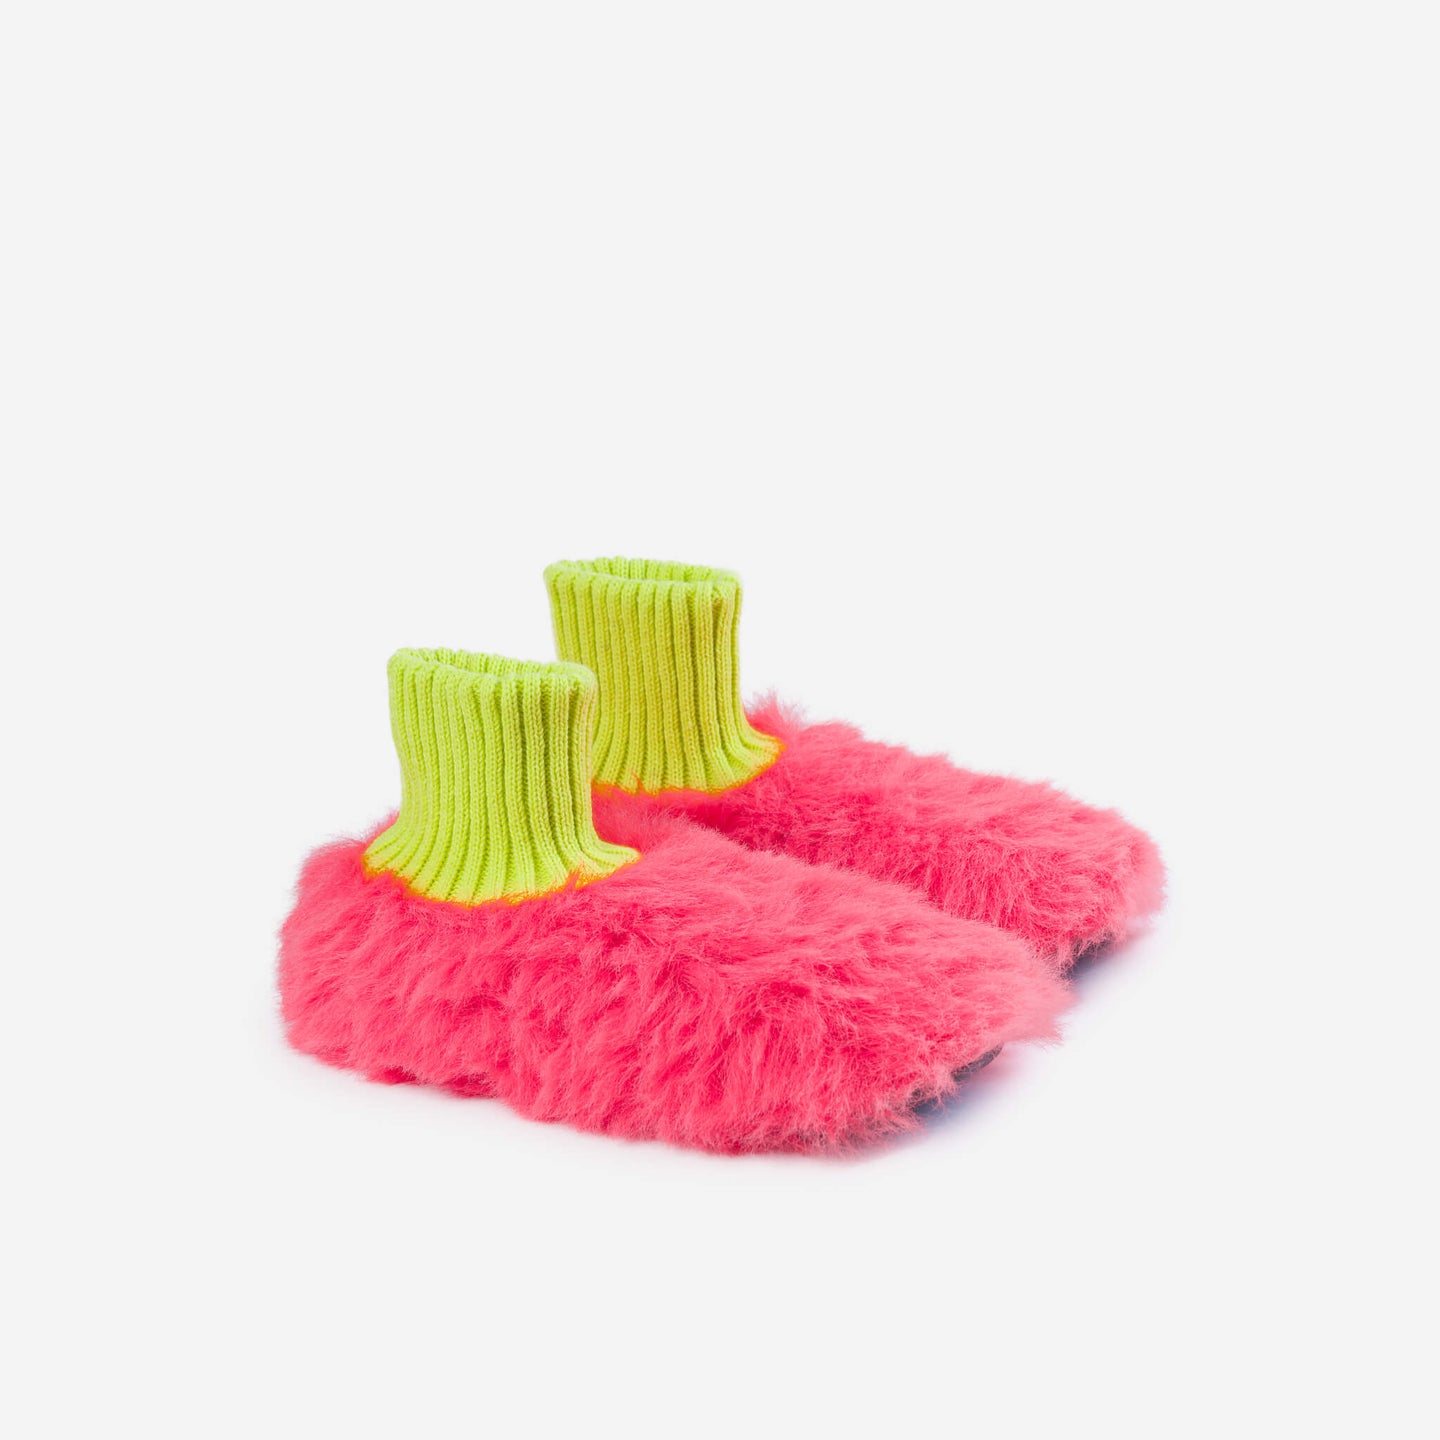 Furry Fuzzy Sock Slippers Monster Muppet Booties Warm Fuzzy Cute Indoor Rib Slippers